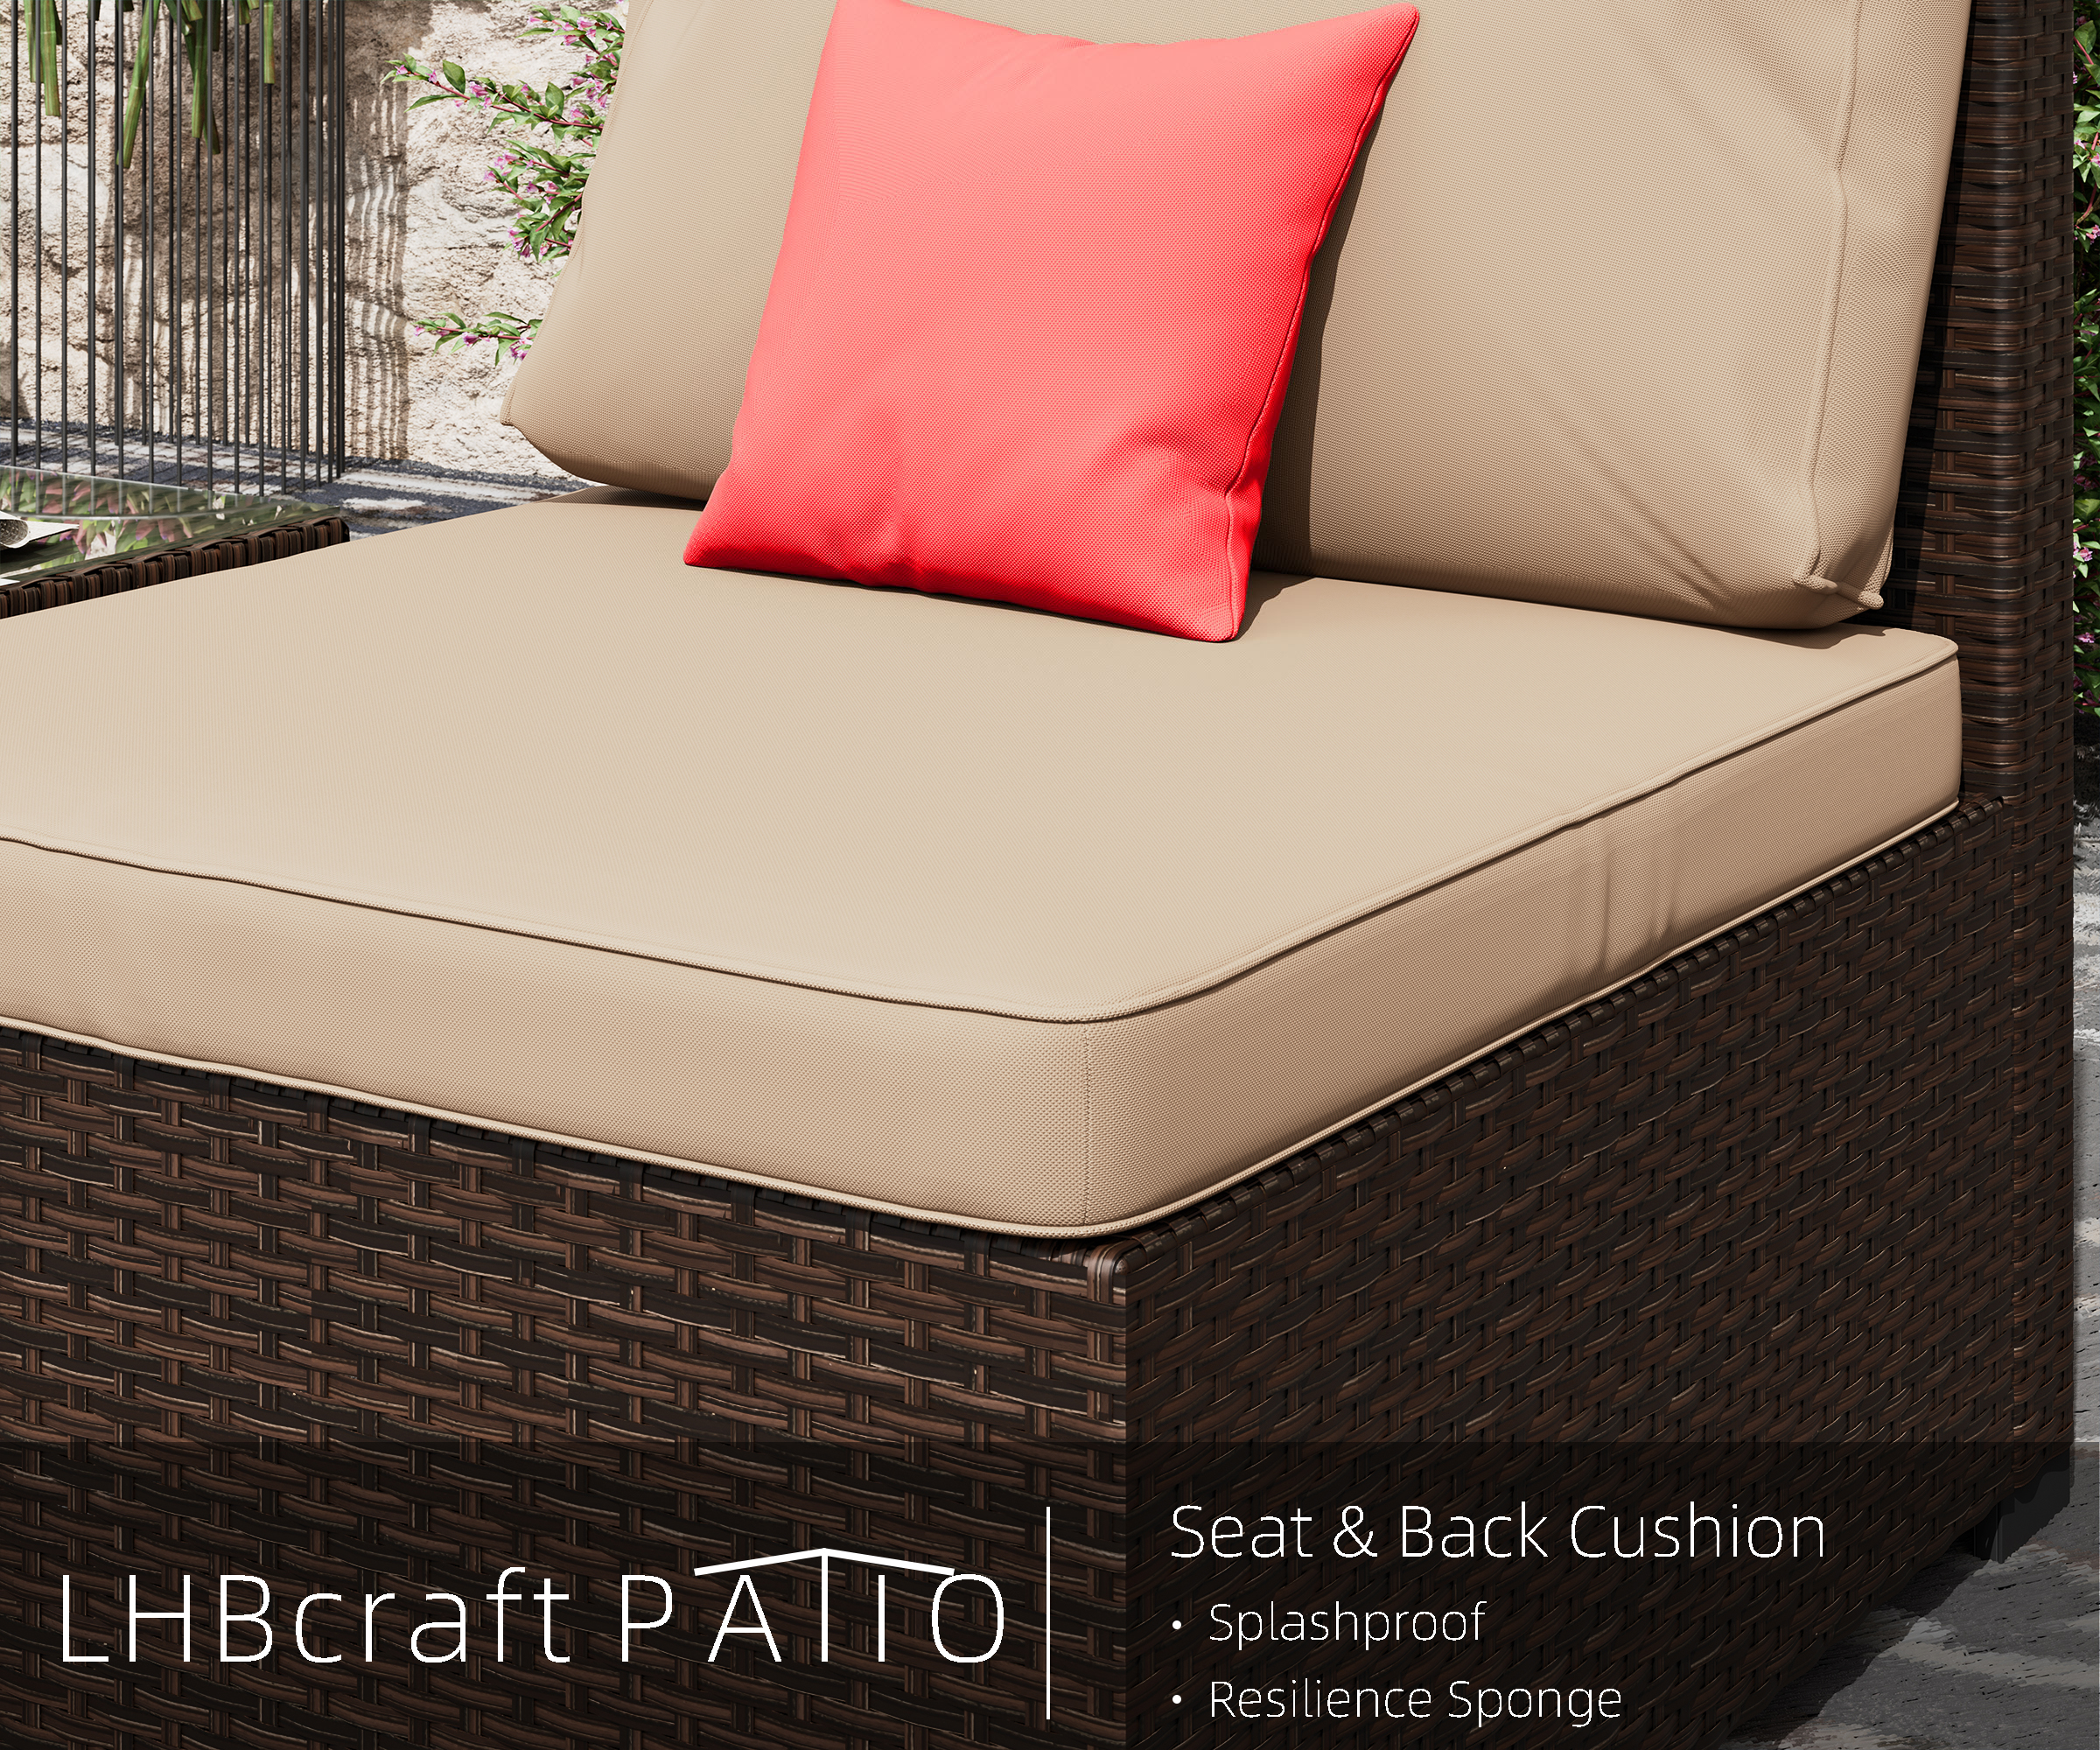 7 Piece Patio Furniture Set, Outdoor Furniture Patio Sectional Sofa, All Weather PE Rattan Outdoor Sectional with Cushion and Coffee Table. - image 4 of 6